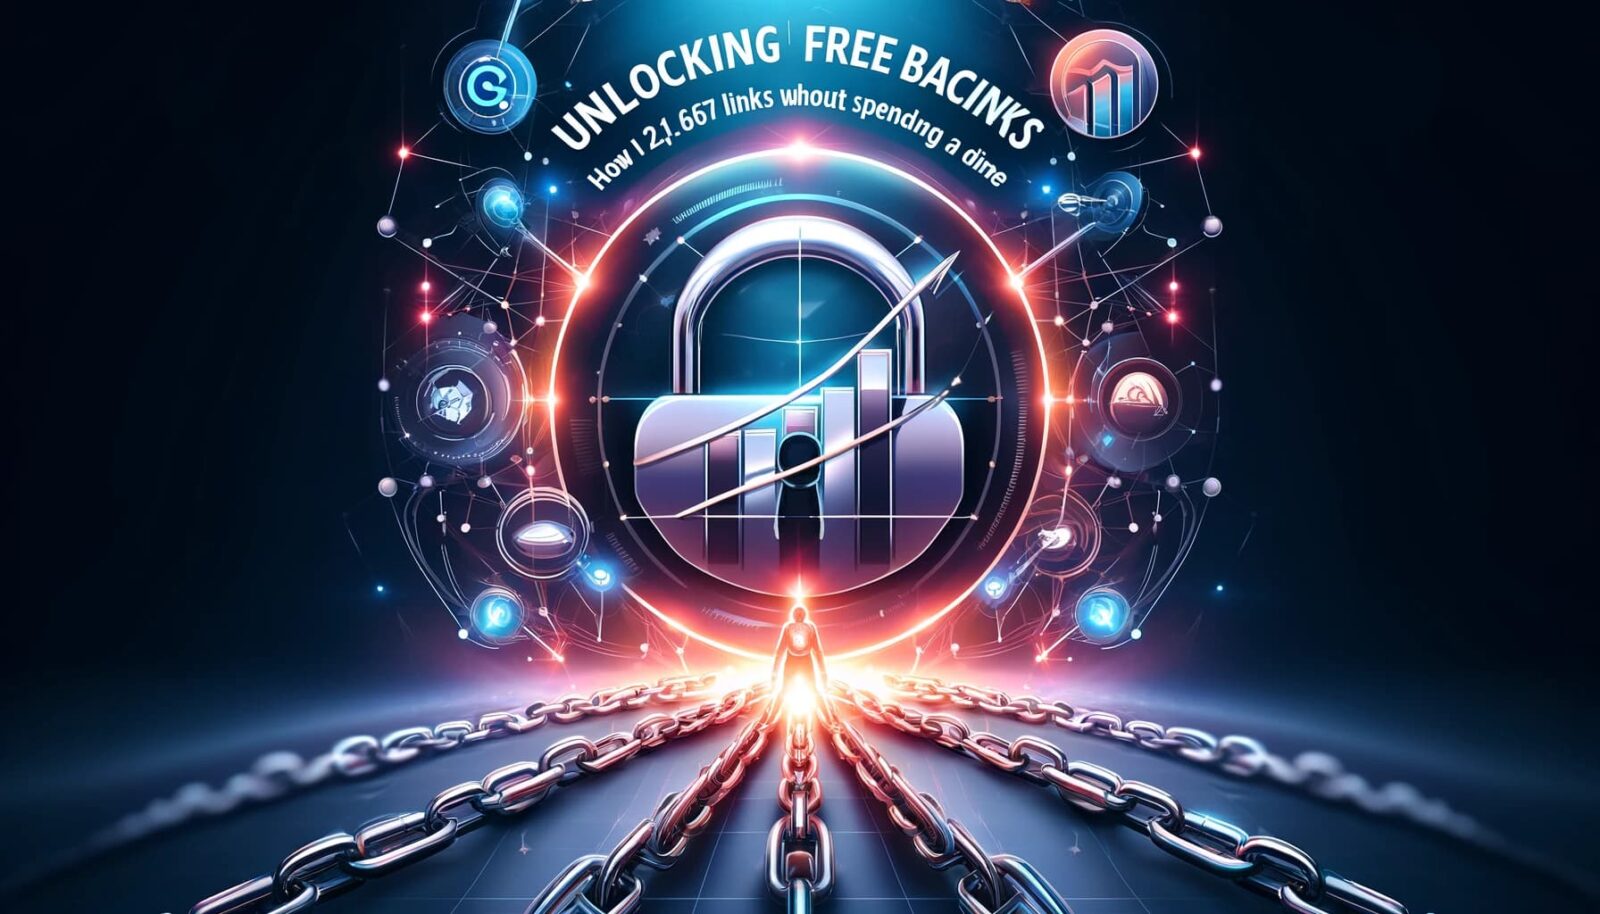 'Unlocking Free Backlinks_ How I Gained 2,165 Links Without Spending a Dime'.